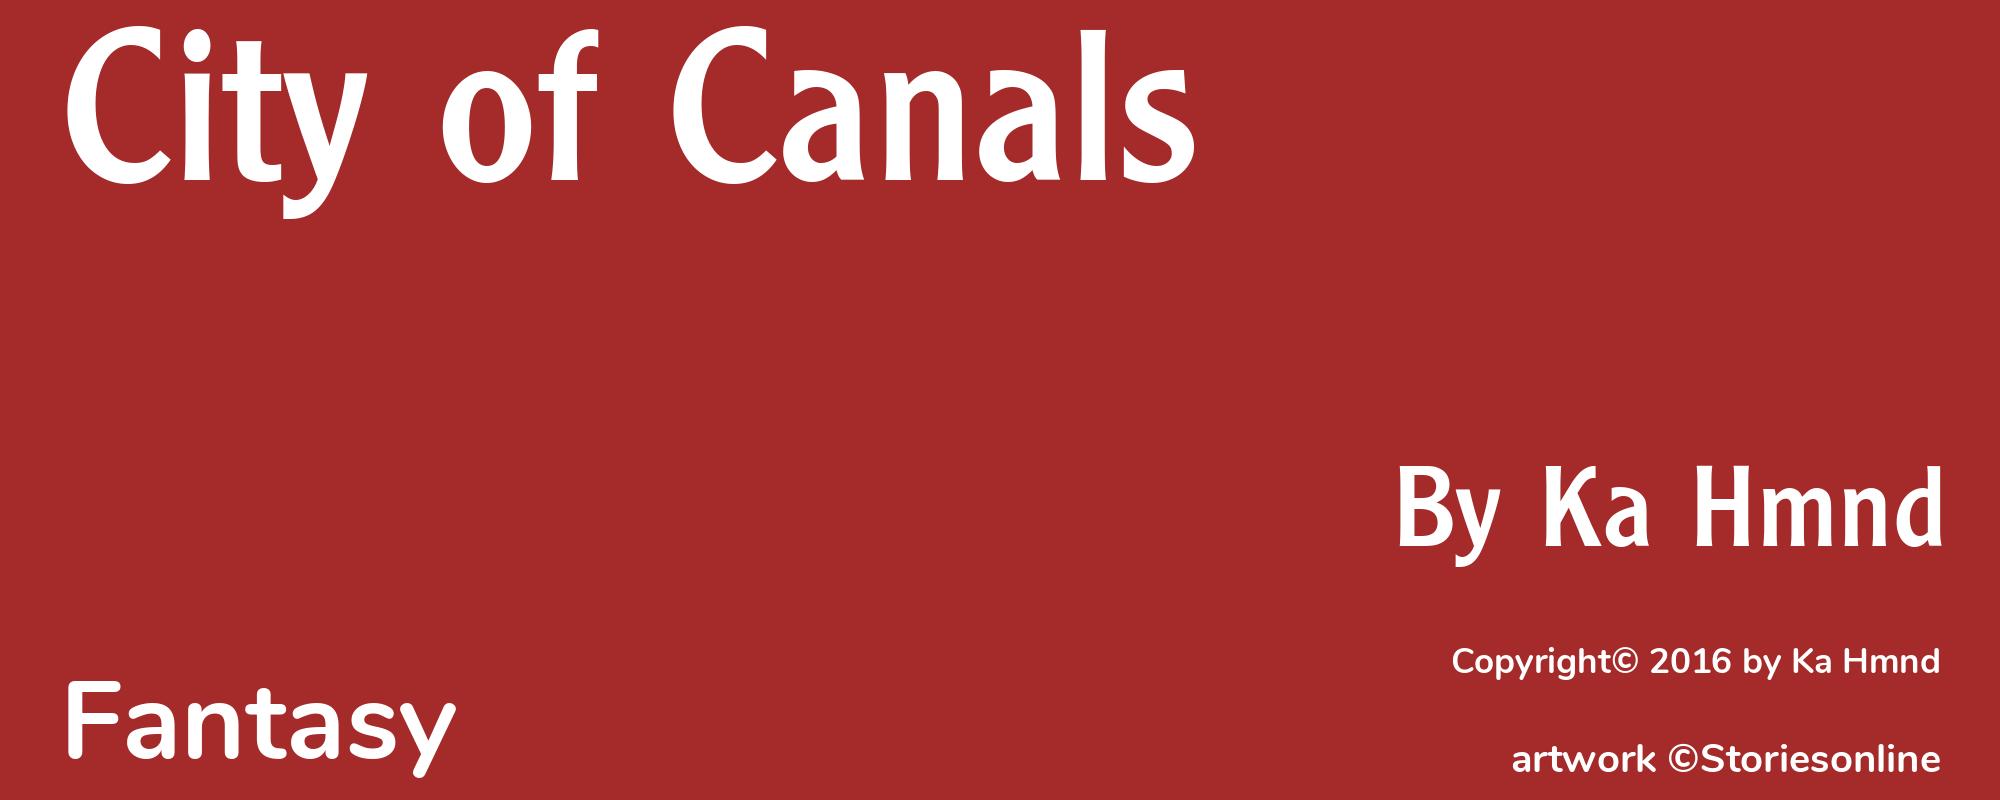 City of Canals - Cover